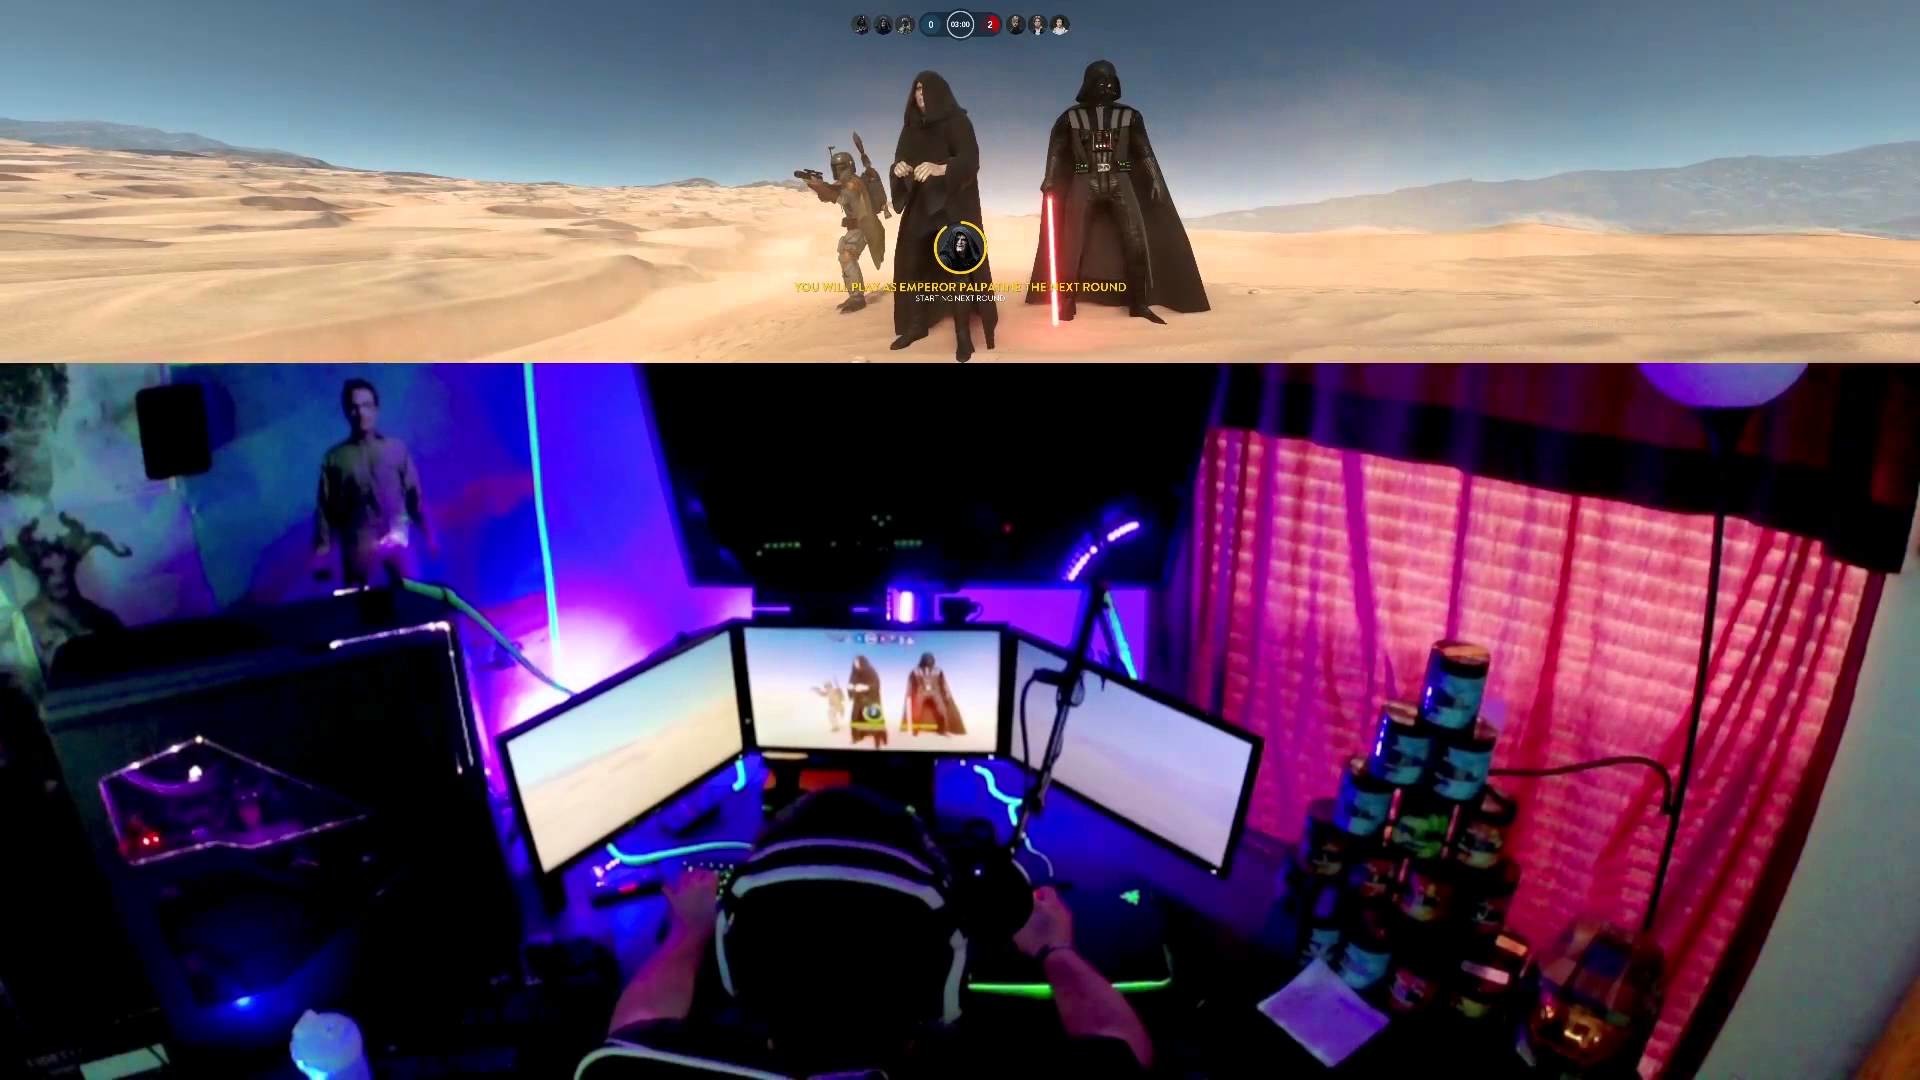 1920x1080 STAR WARS: BATTLEFRONT at 5760 x 1080! ULTRA GRAPHICS SETTINGS! - YouTube